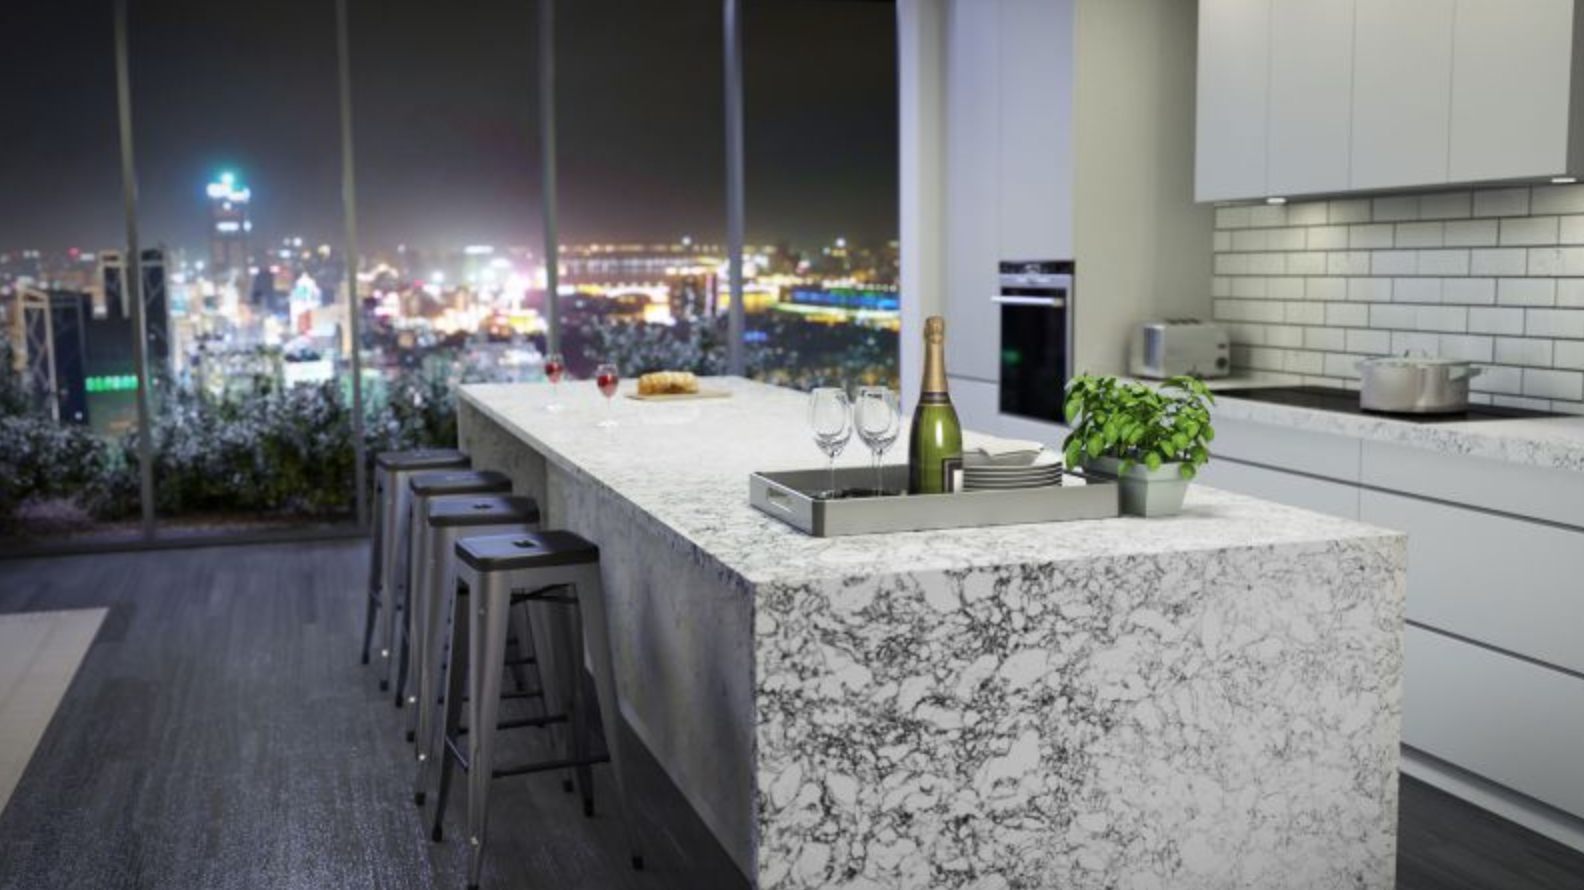 Crumbling Stone Structures Cambria Quartz Countertops Veins Fade Cambria Products Slight Ombre Effect White Splashes Inspiration Gallery Slab Surface Showroom More Information Brand Sinks